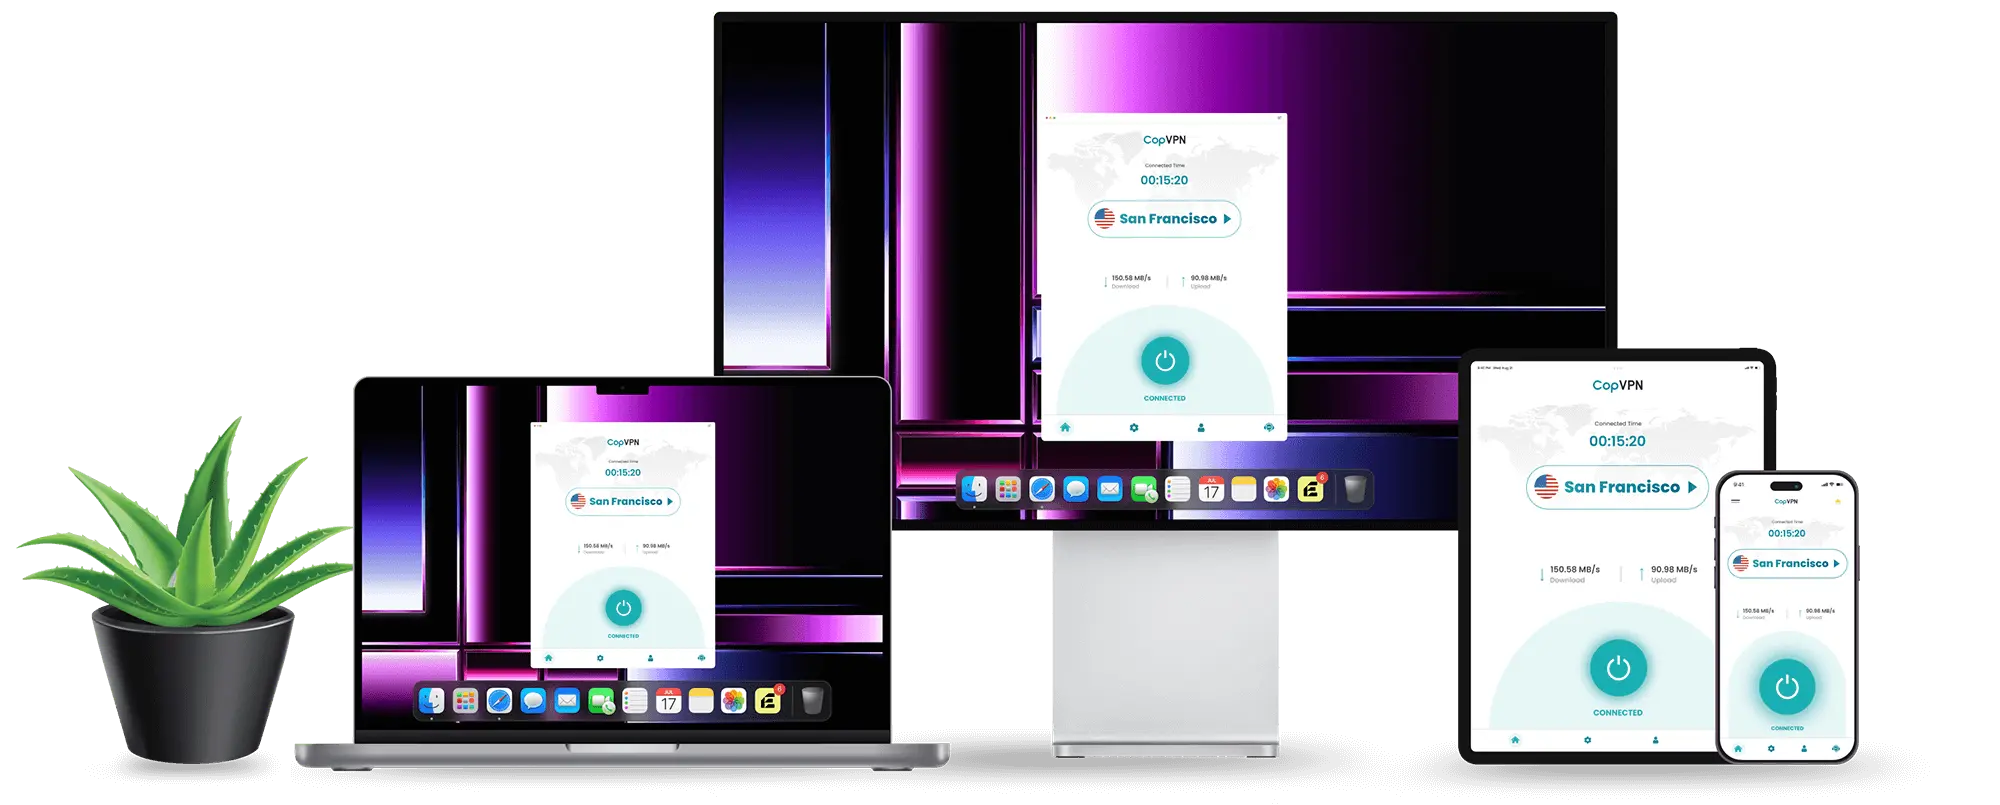 The CopVPN app is available for all devices. This image shows a computer, laptop, tablet, and mobile phone screen connected to the CopVPN San Francisco server.